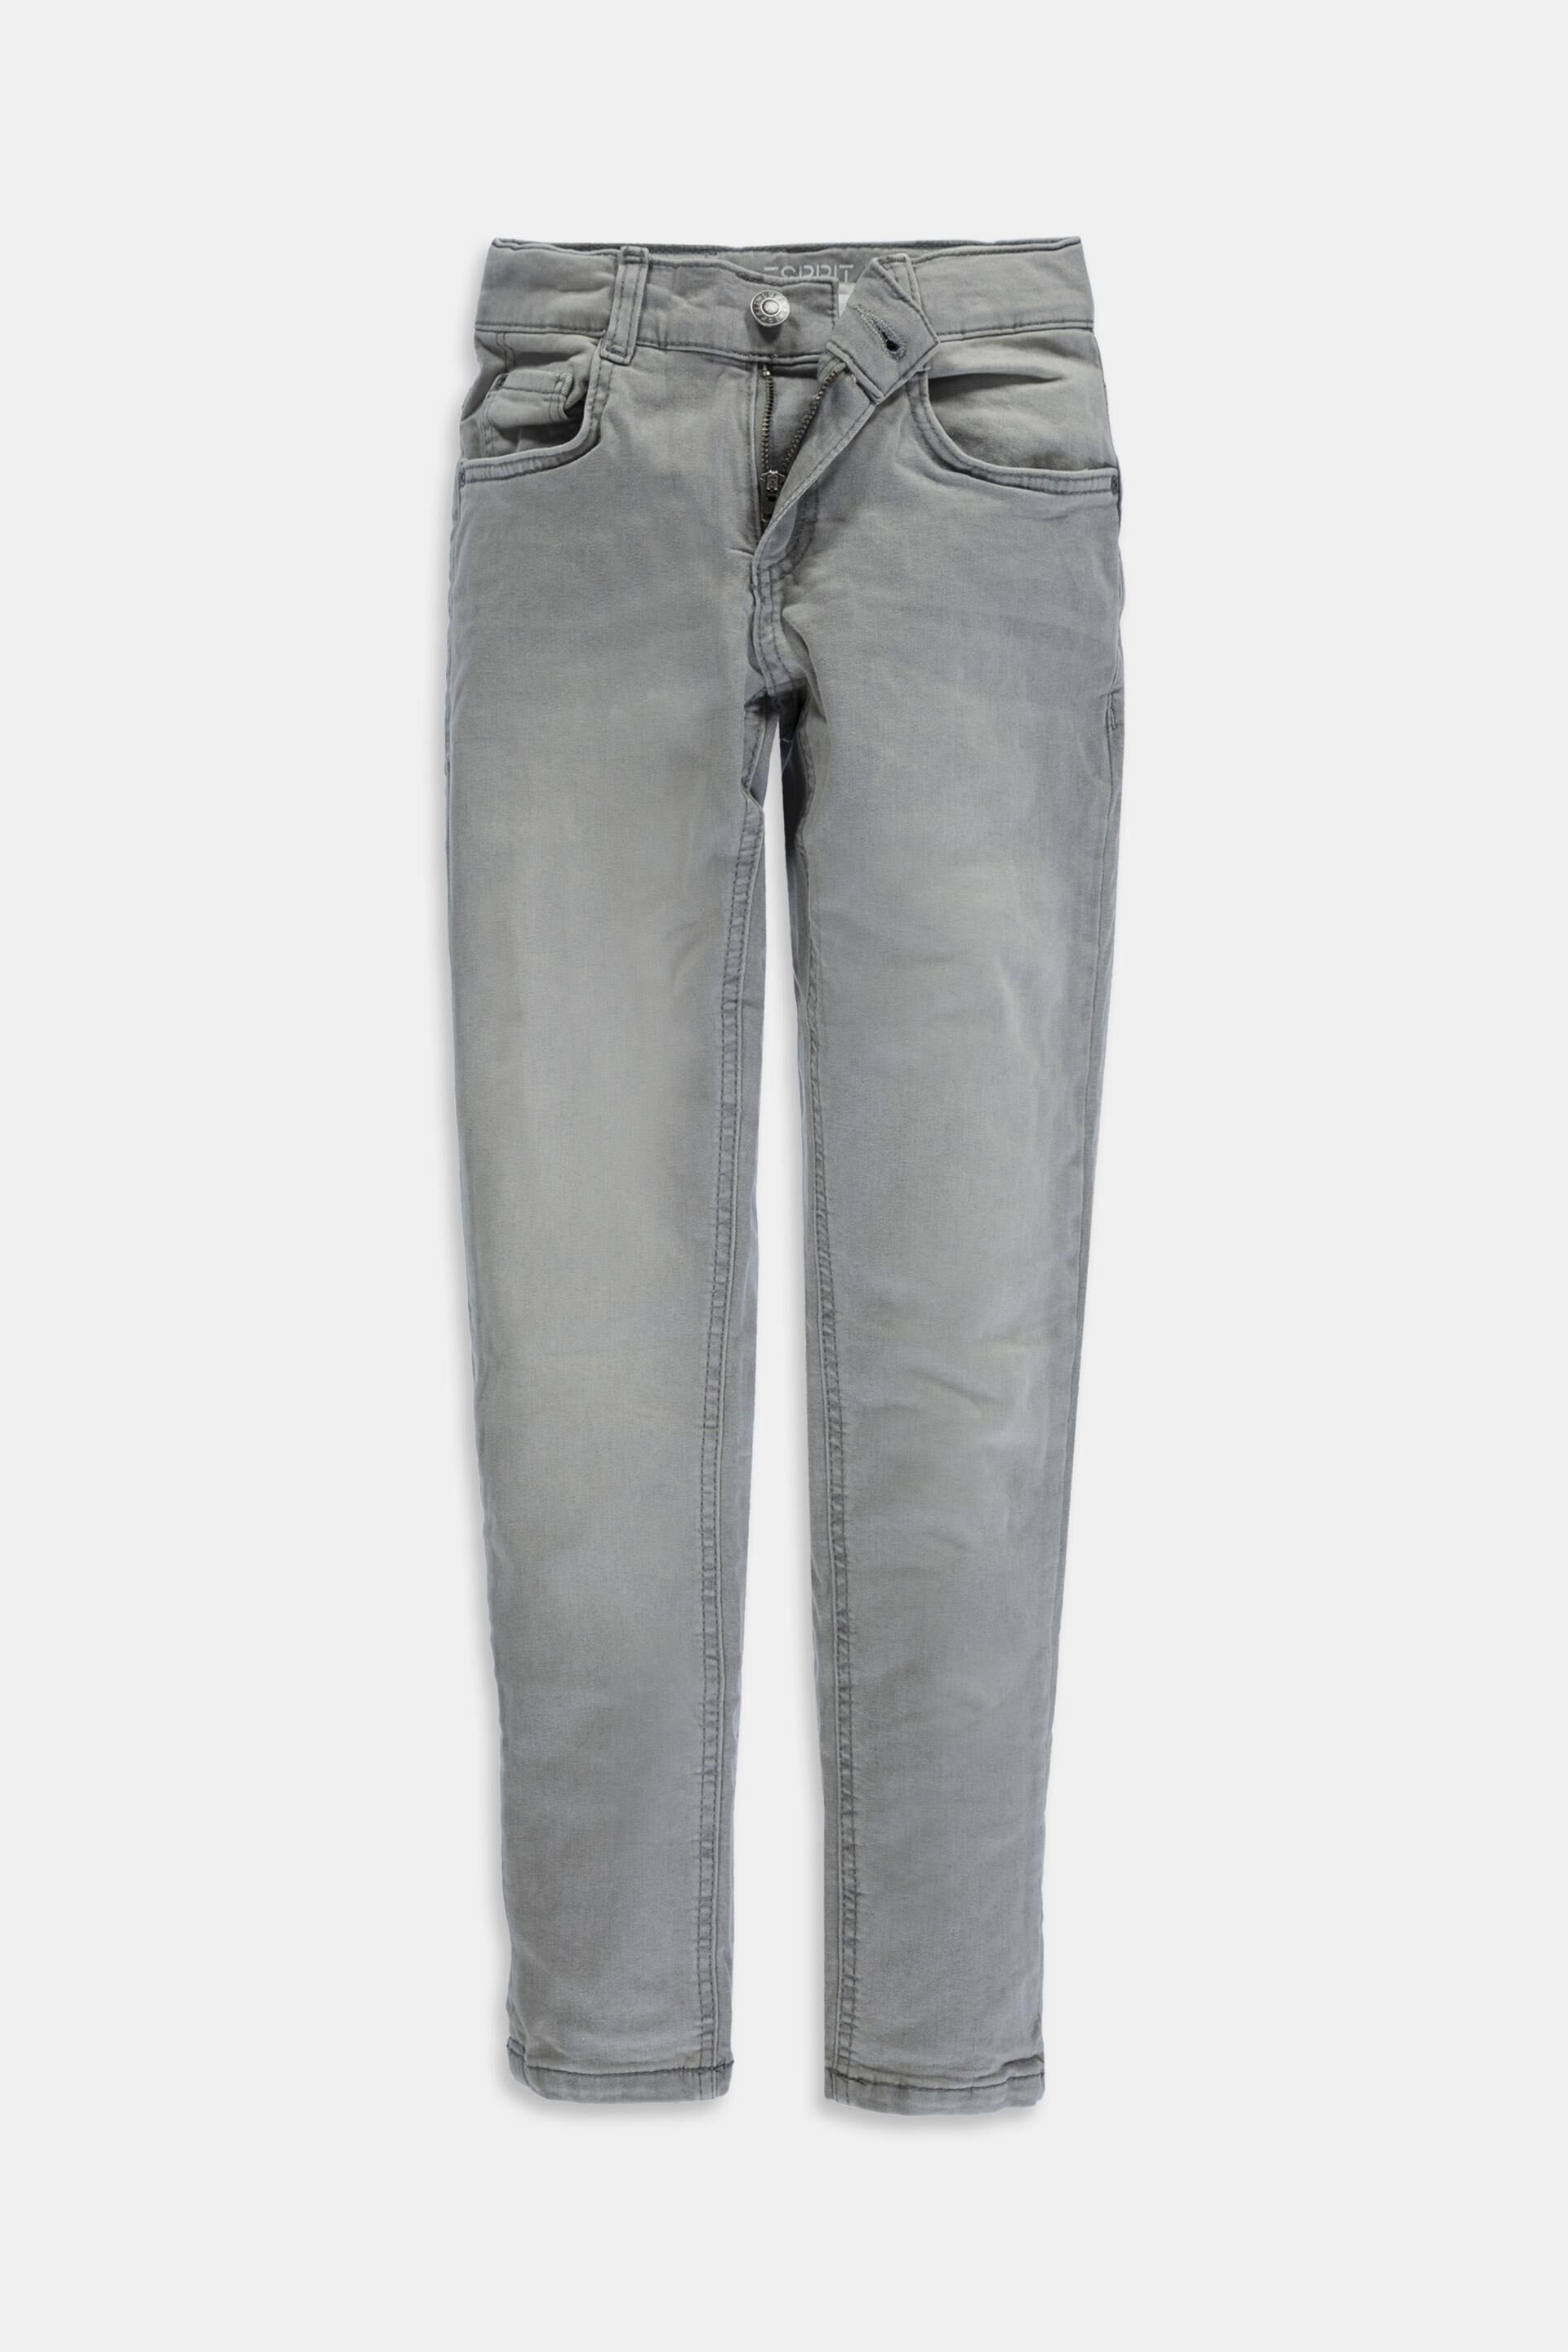 Esprit with adjustable an waistband Jeans